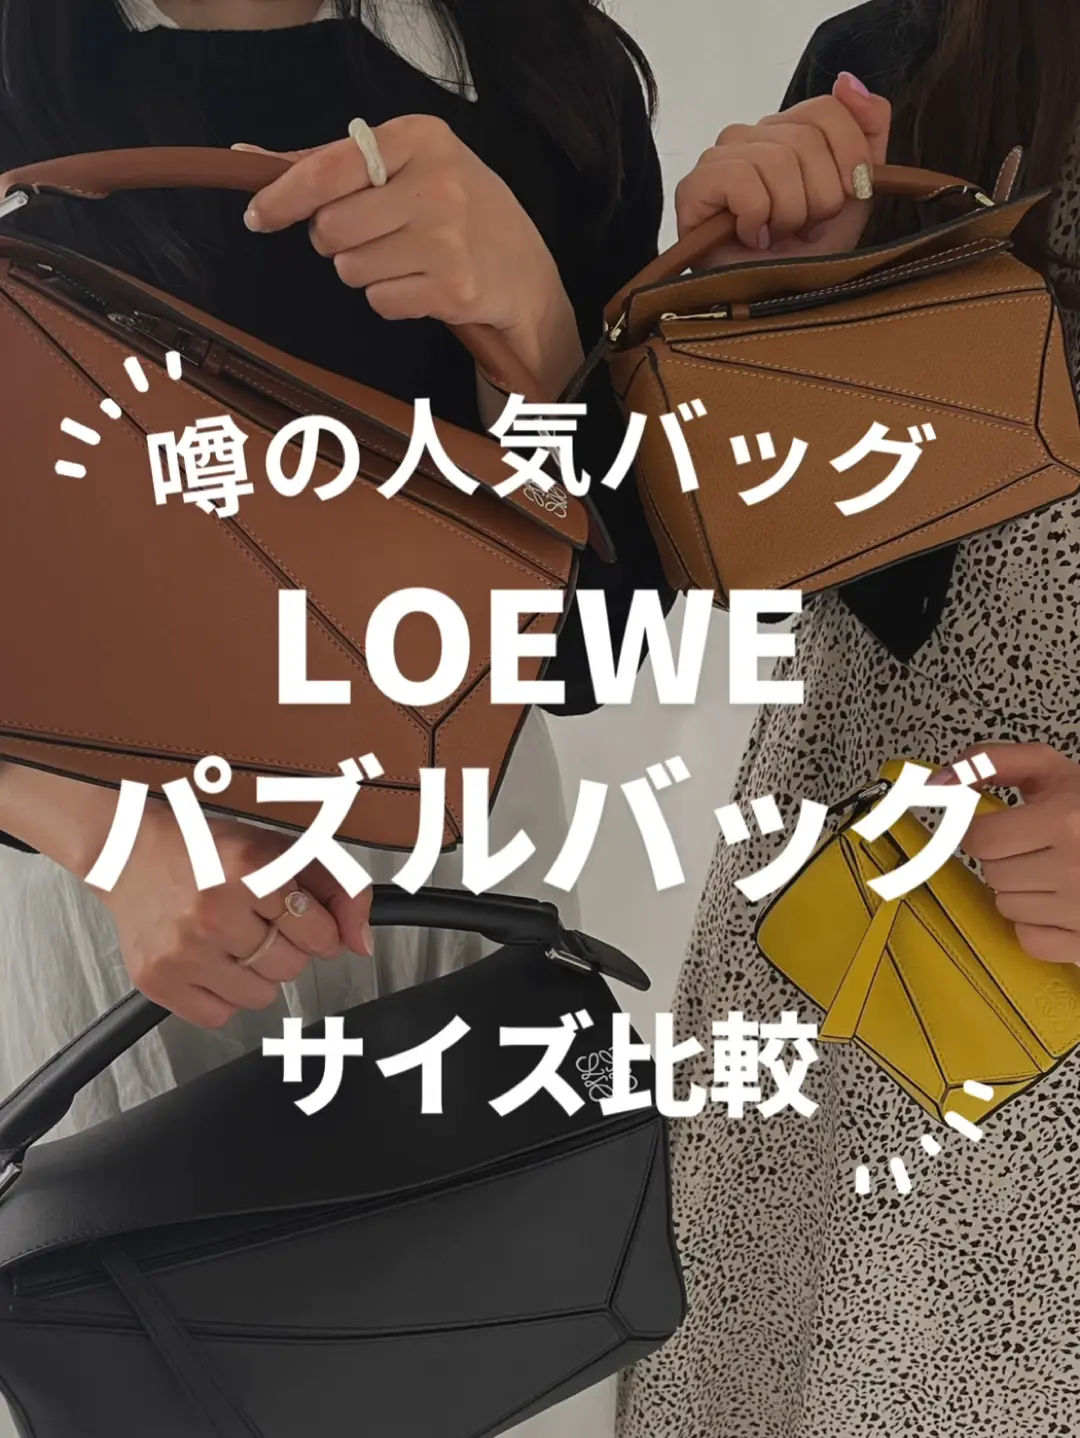 MY NEW LOEWE NANO PUZZLE  Bag Review + Style Inspiration For The